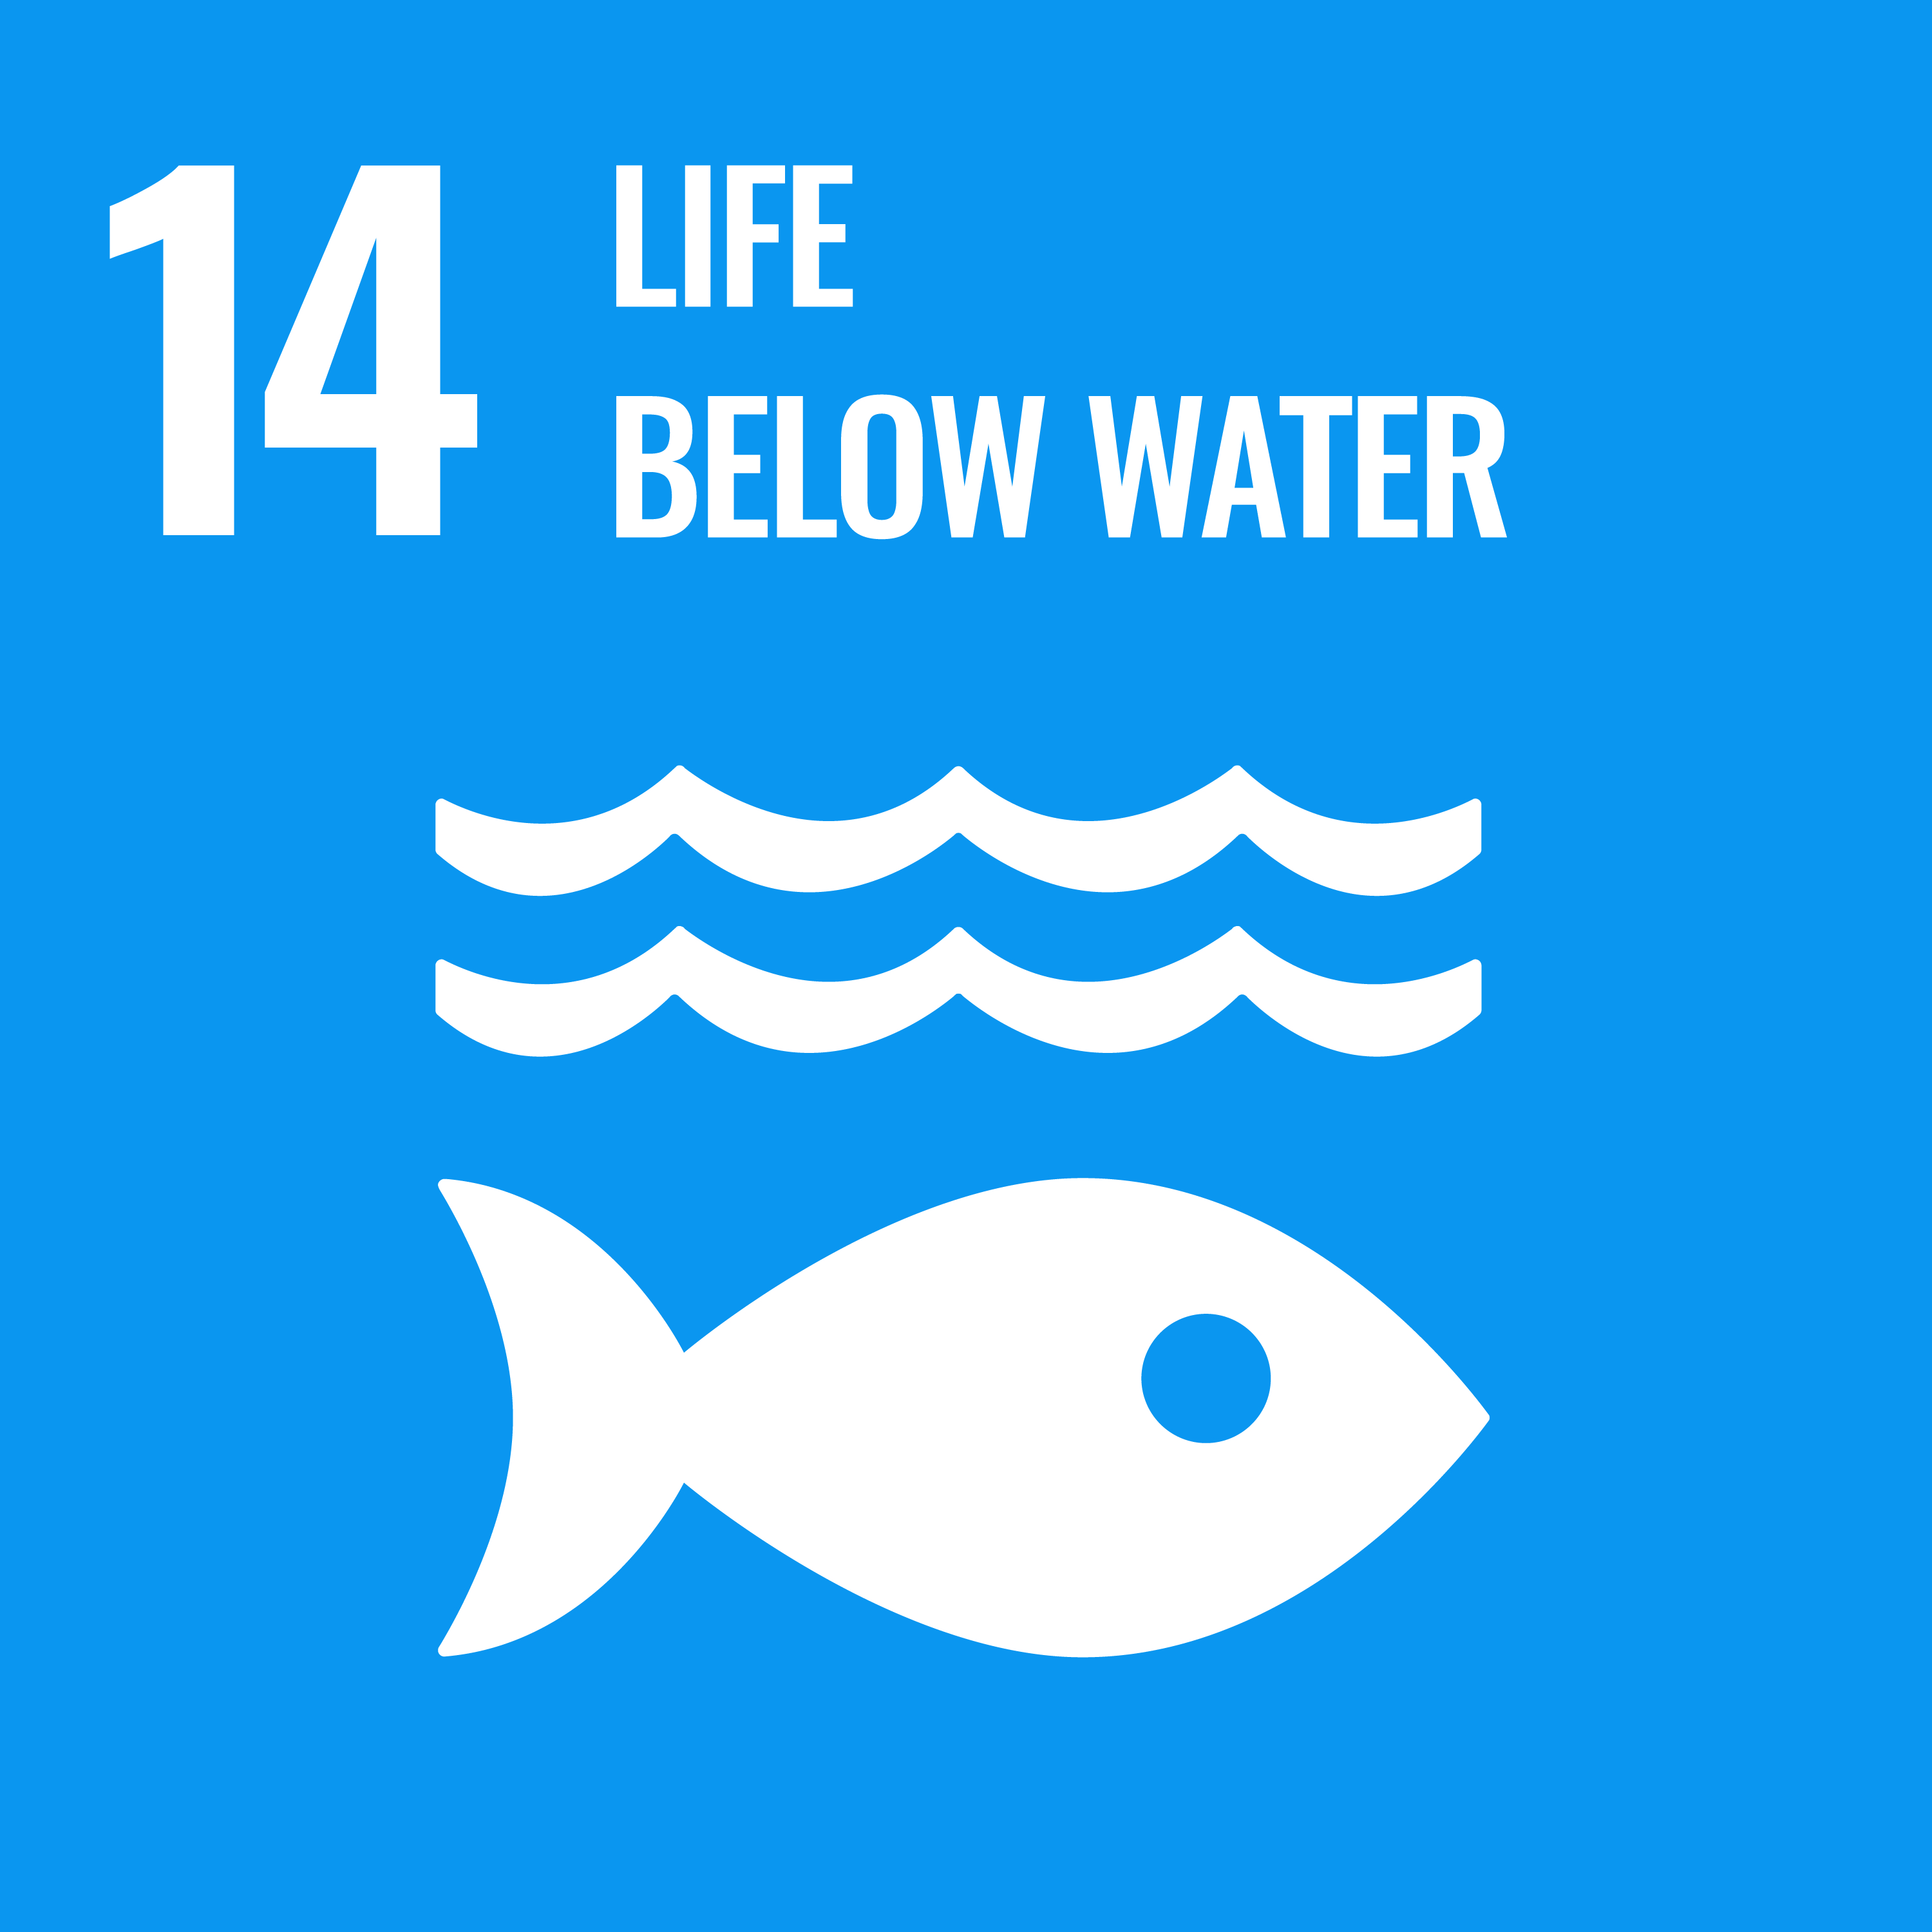 Our contribution to SDG 14